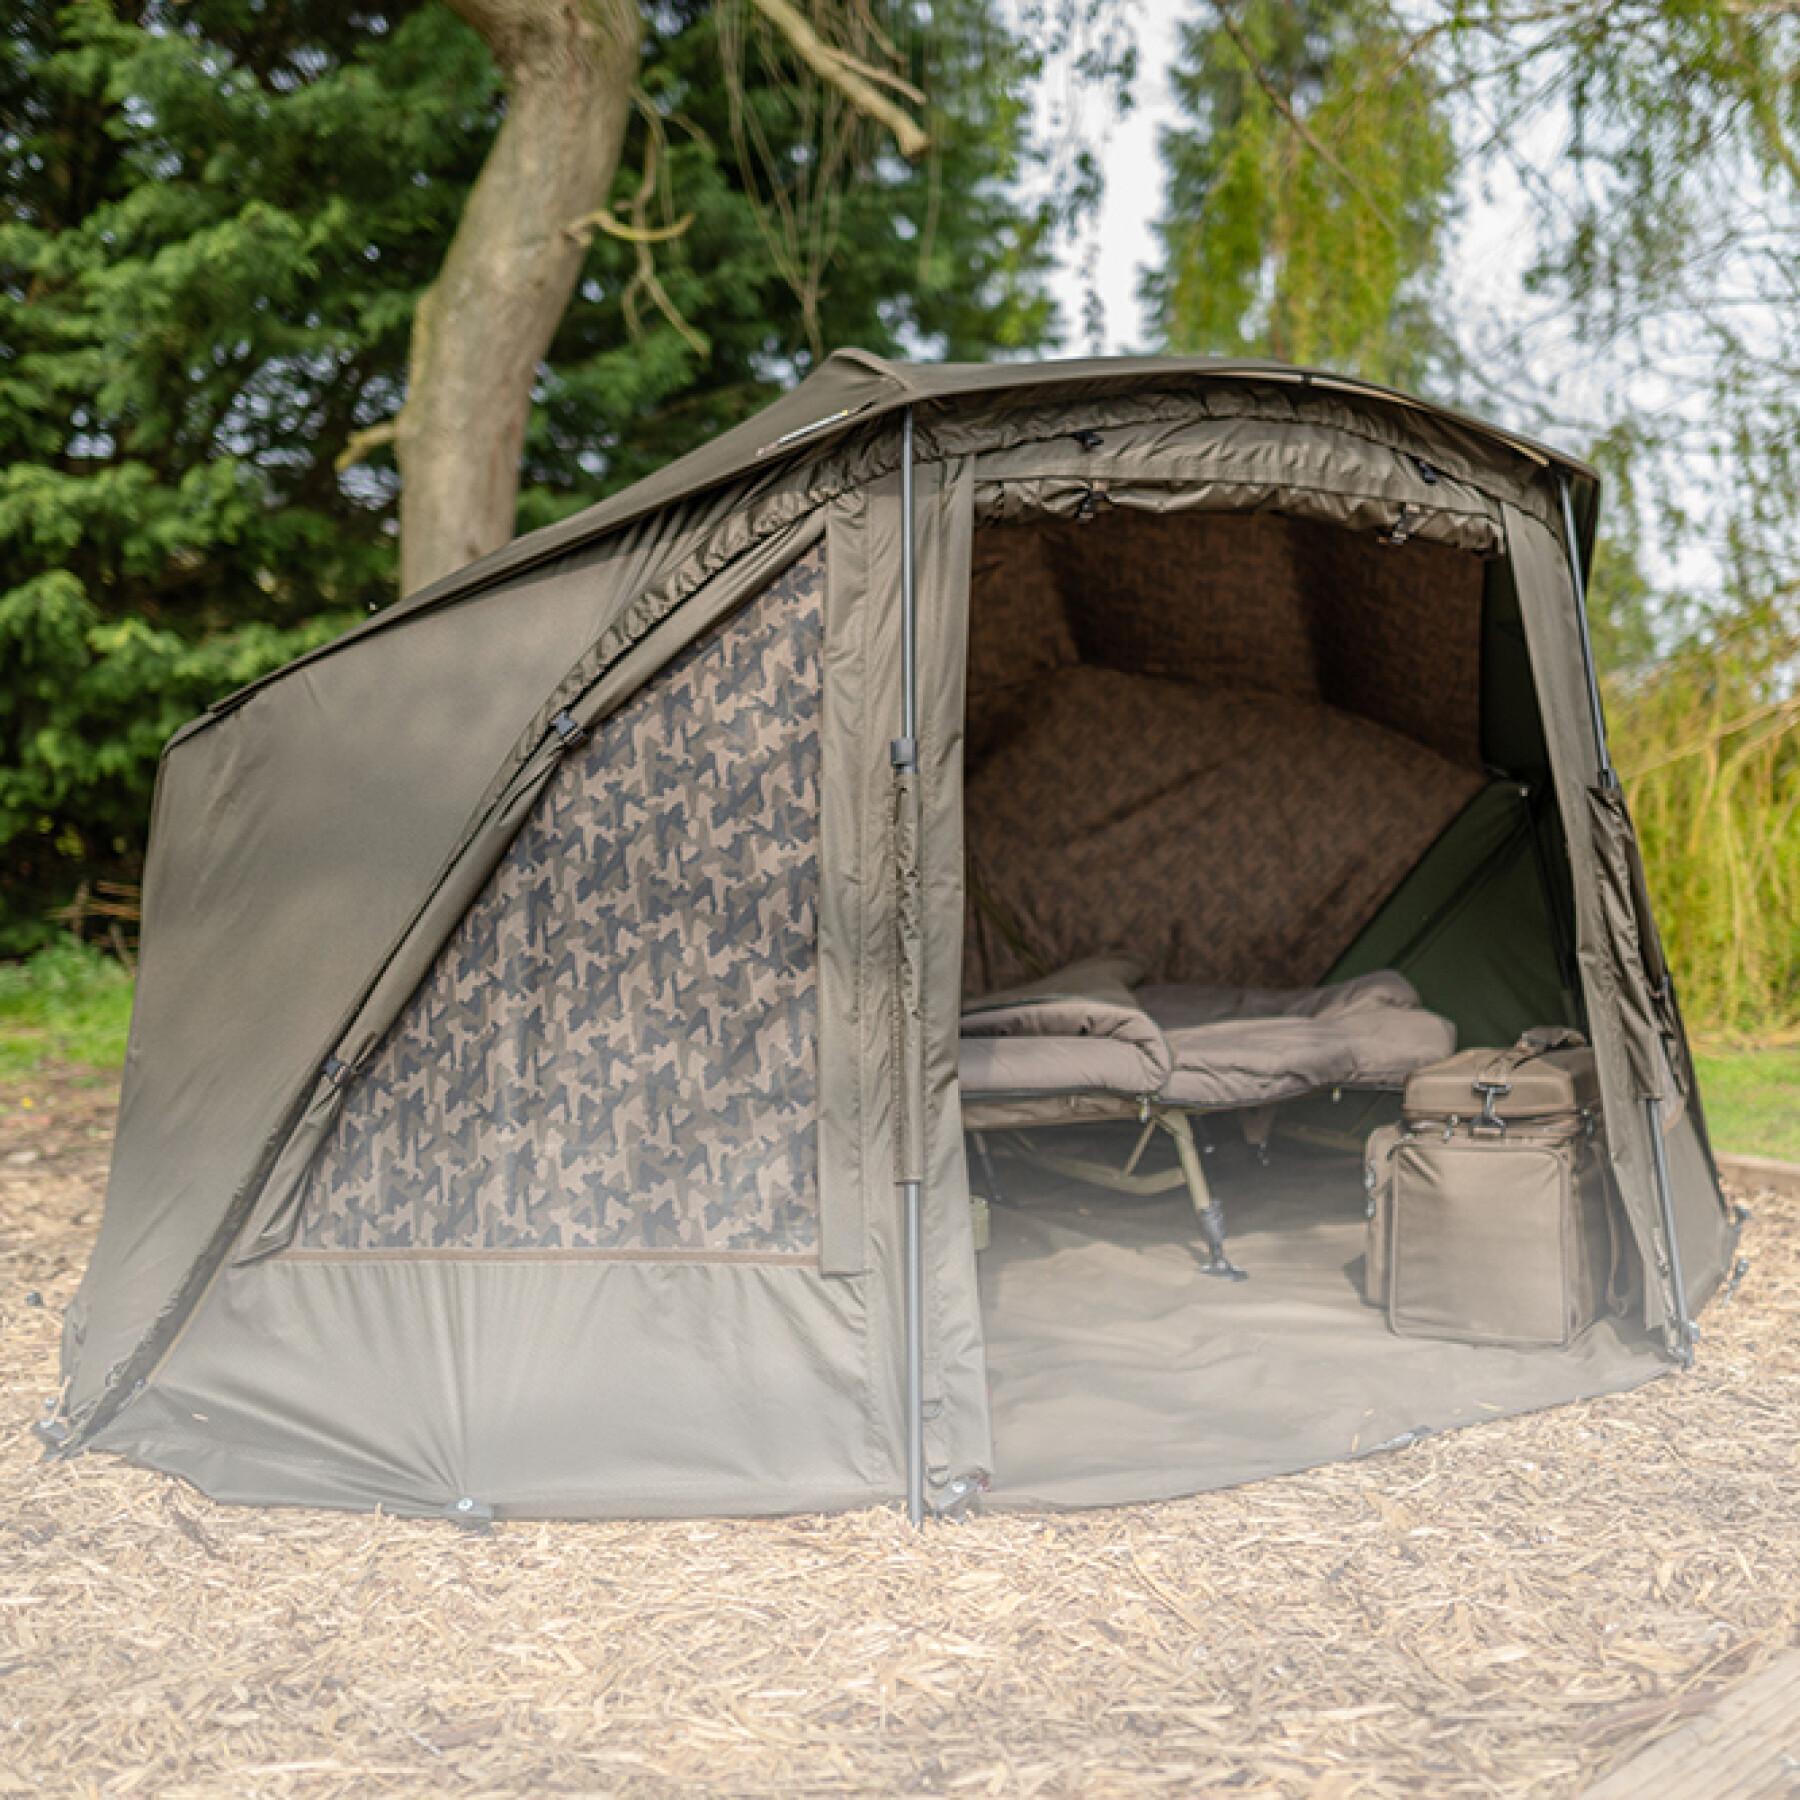 Shelters Avid HQ dual layer brolly system